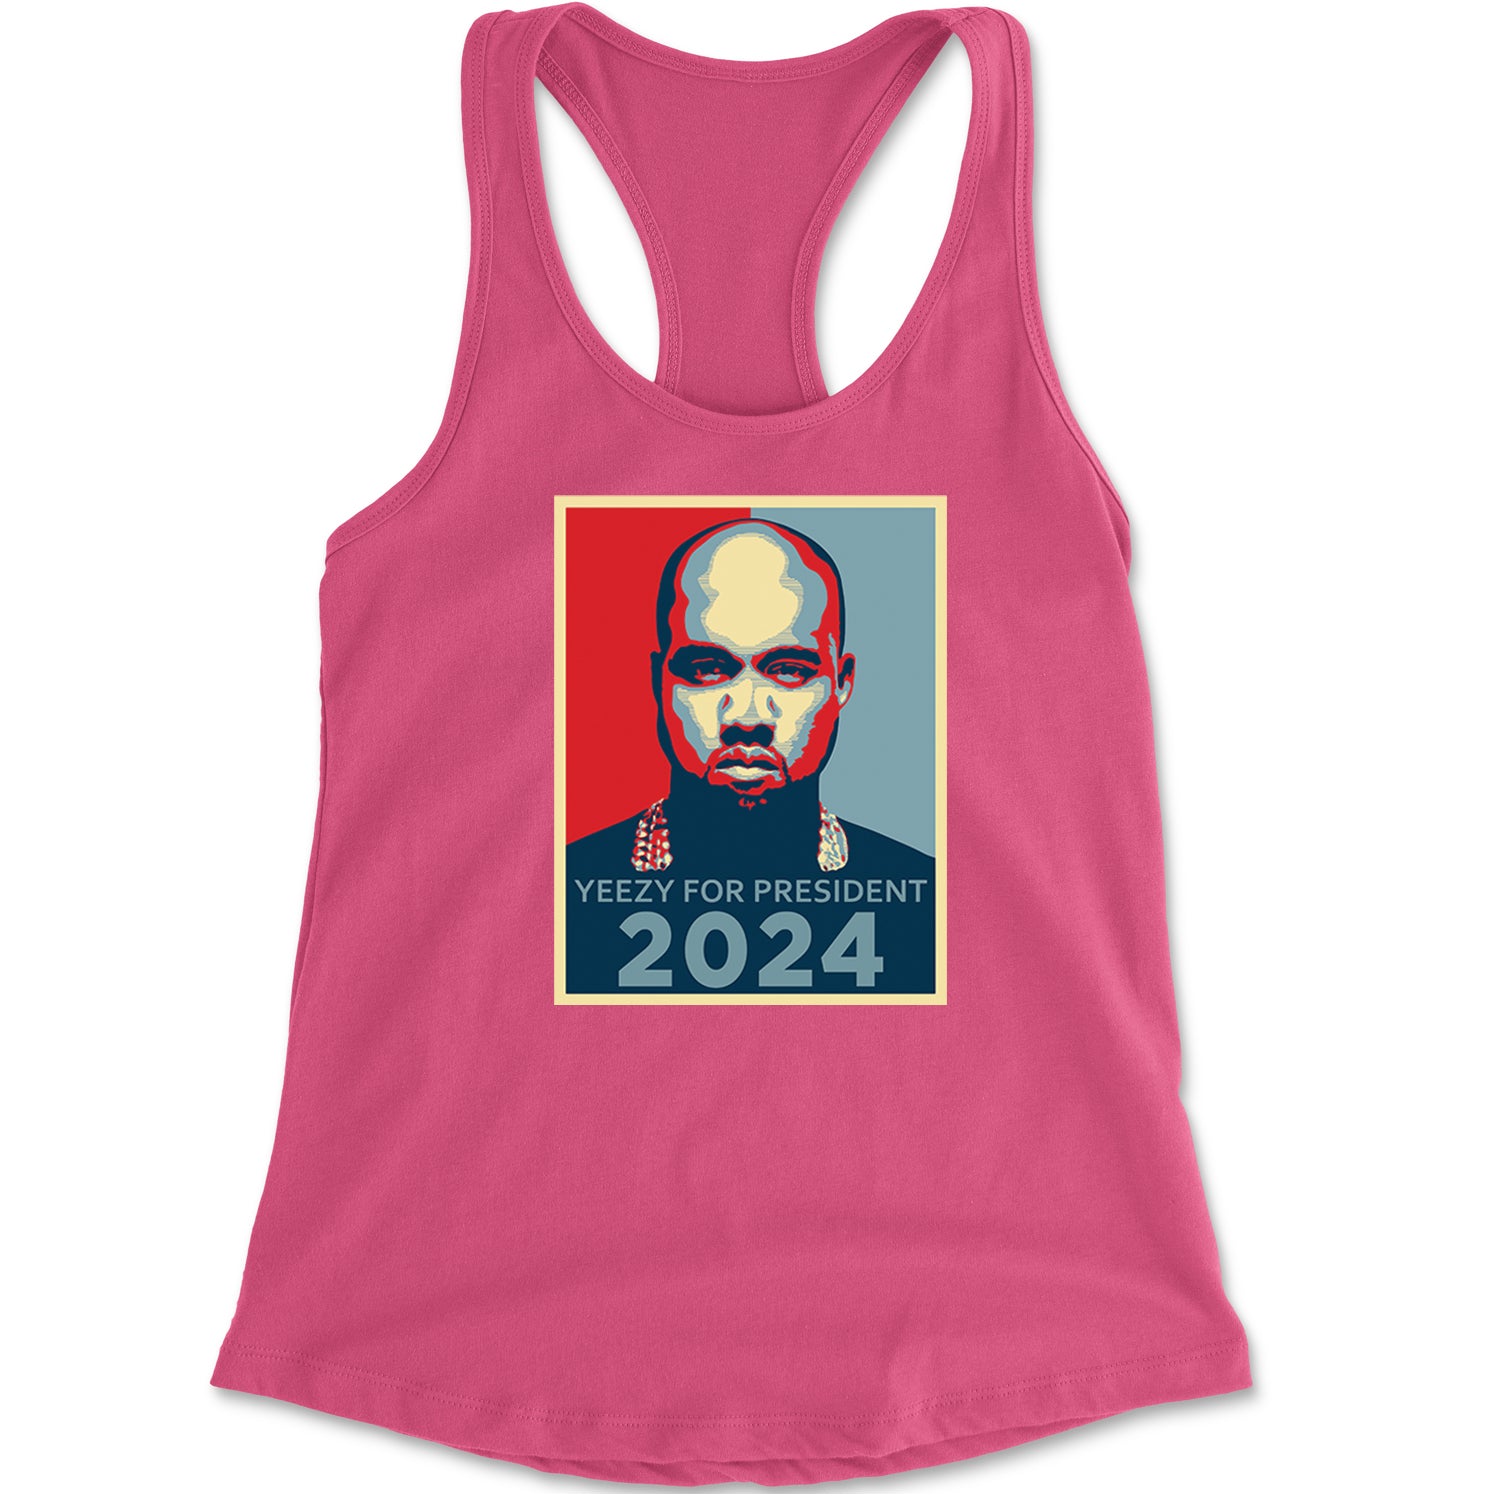 Yeezus For President Vote for Ye Racerback Tank Top for Women Hot Pink